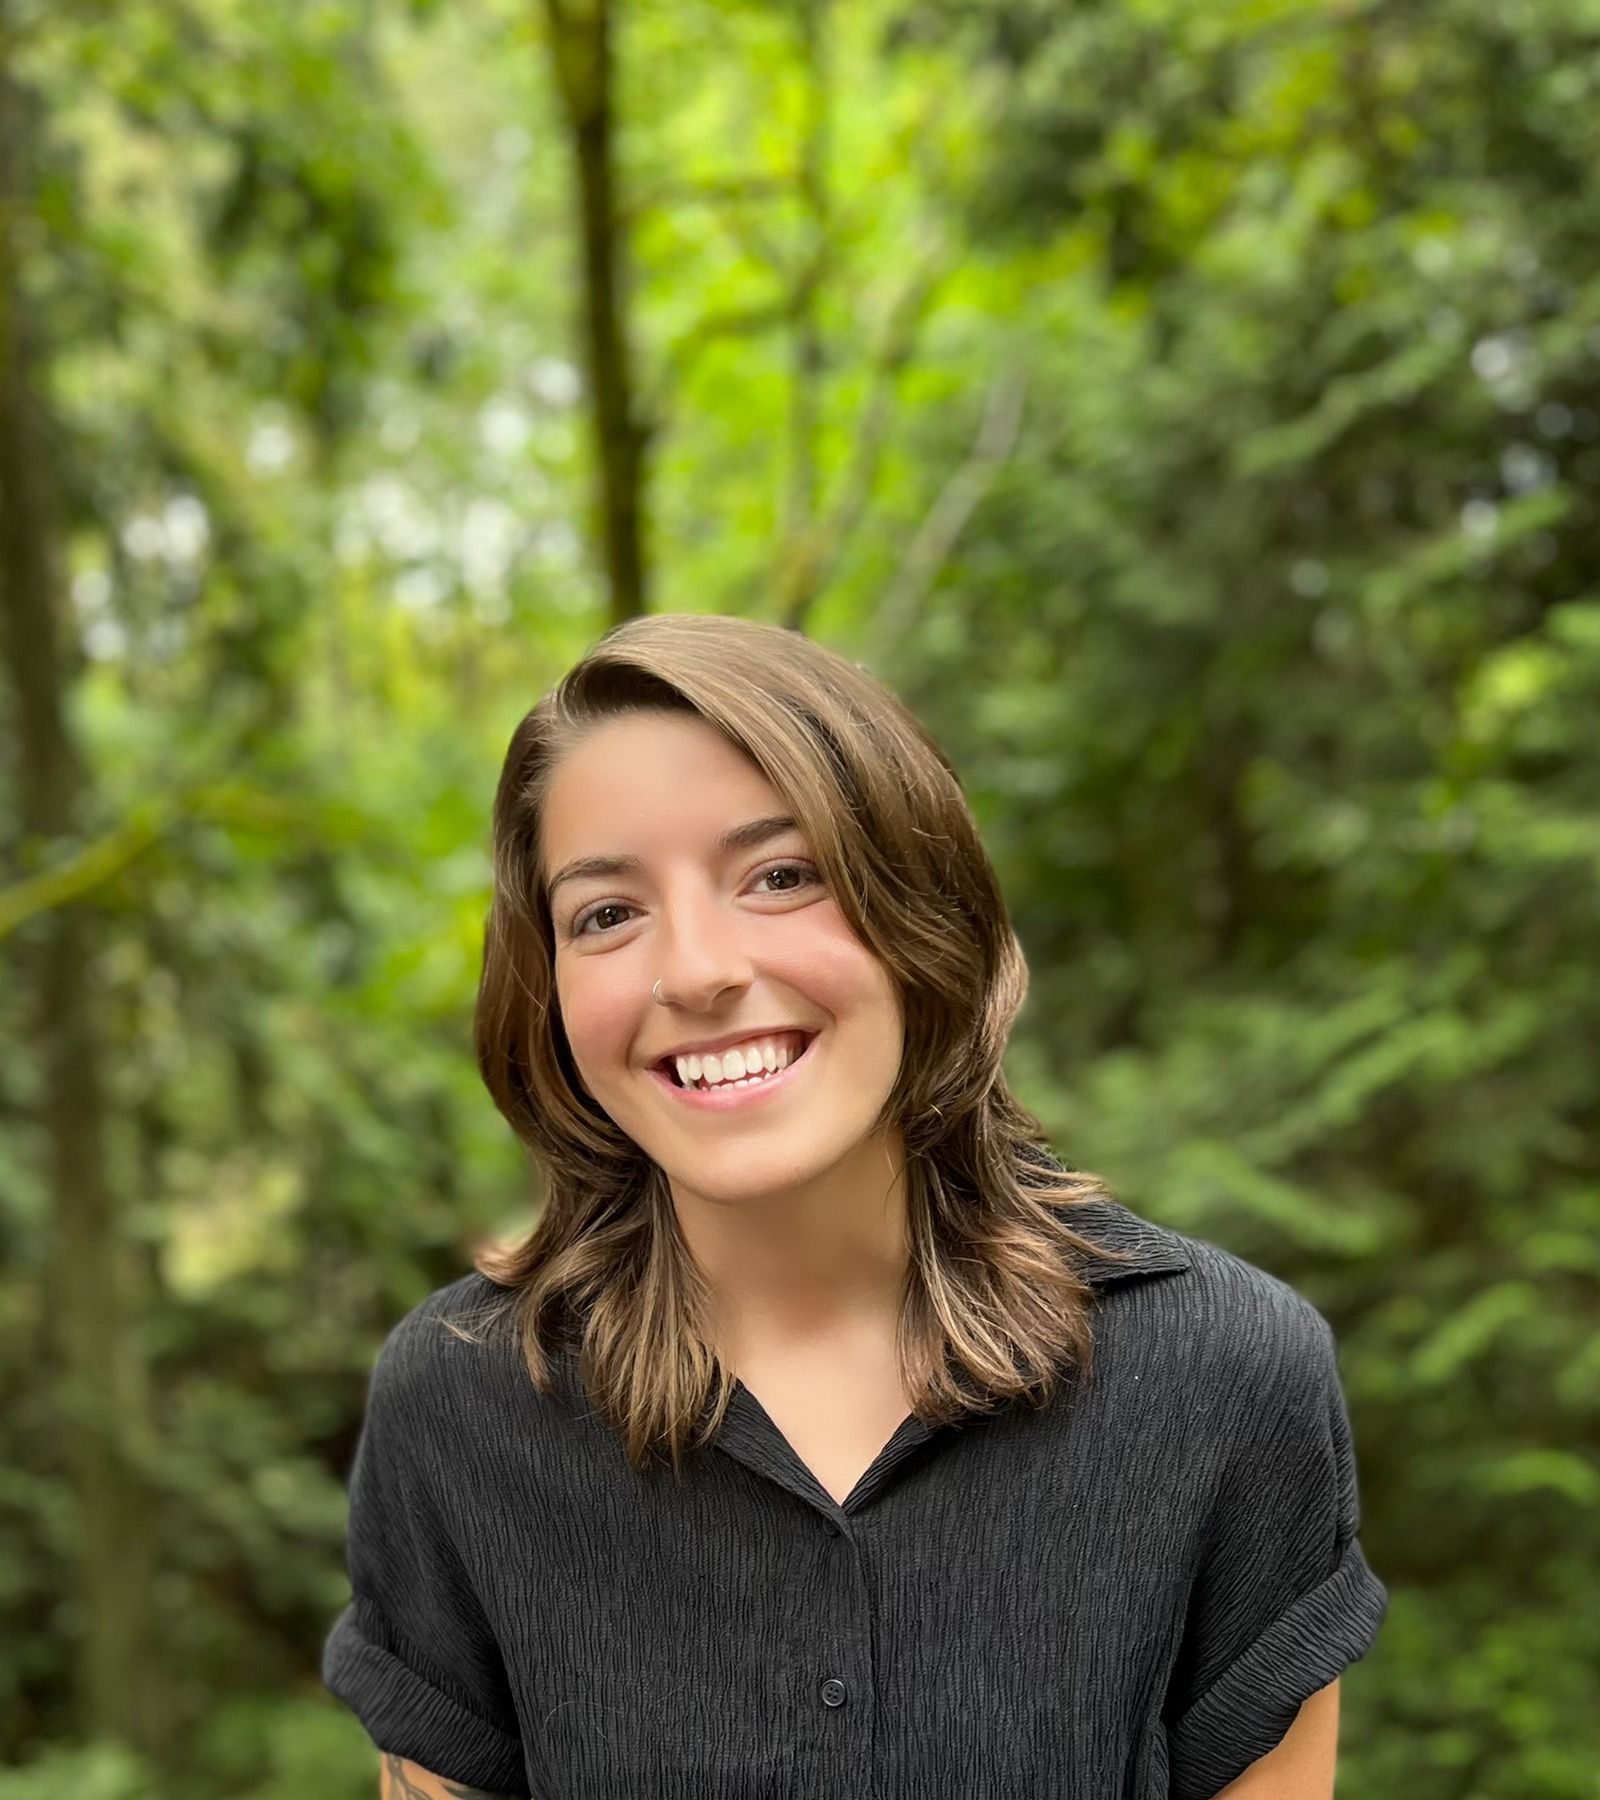 Image of a smiling woman in a black shirt with brown hair standing in the woods